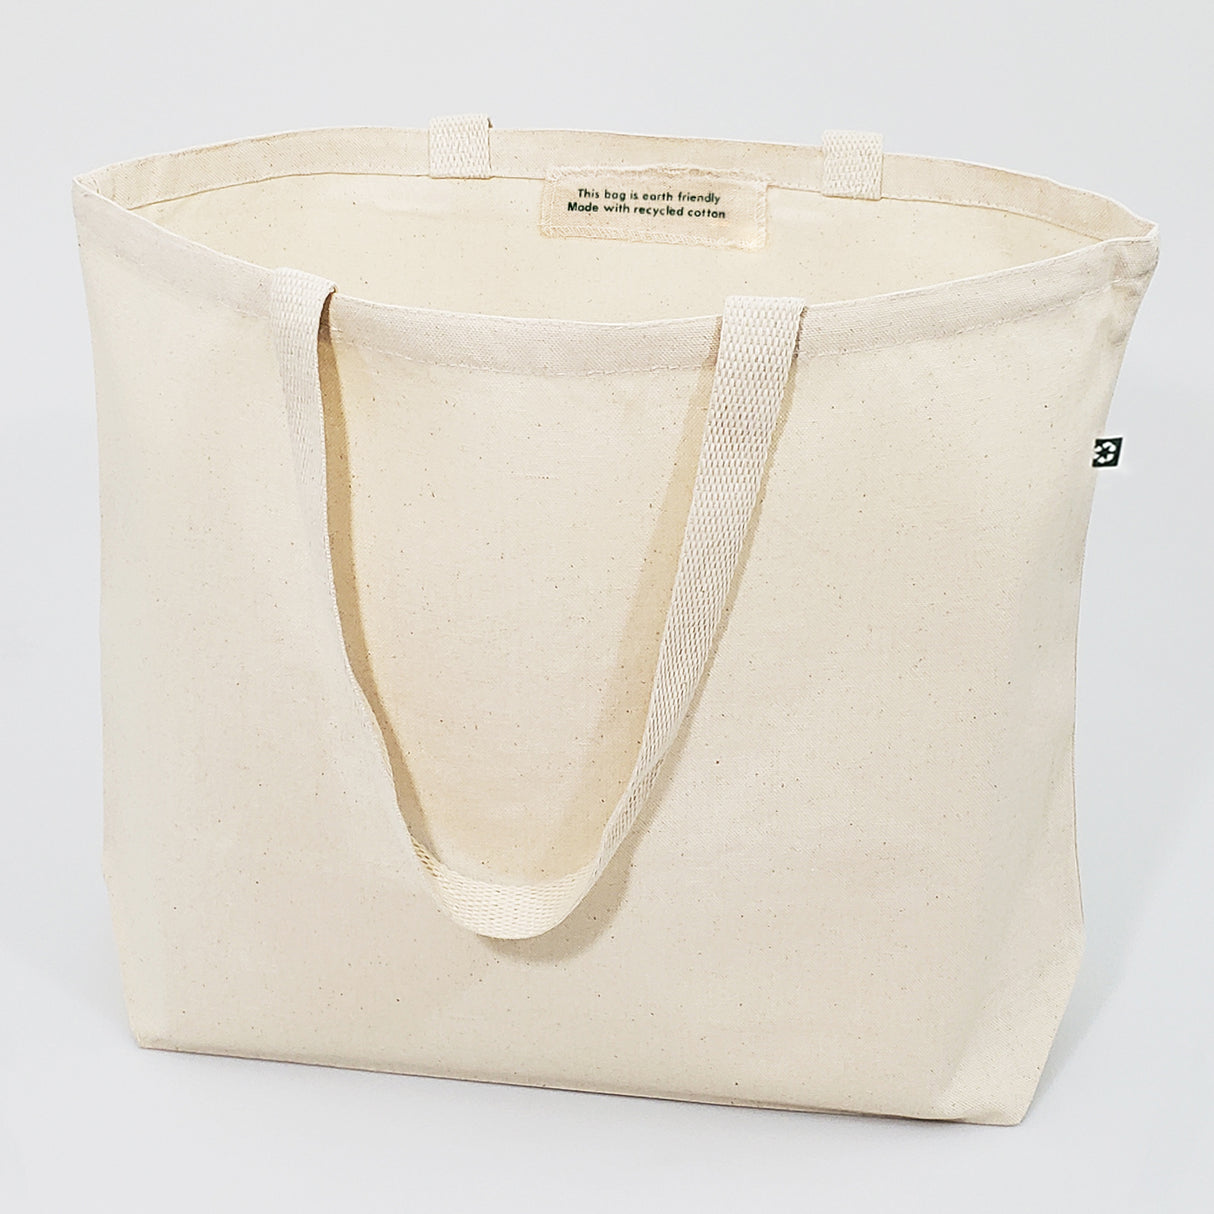 12 ct Large Recycled Cotton Canvas Tote Bags w/Gusset - By Dozen